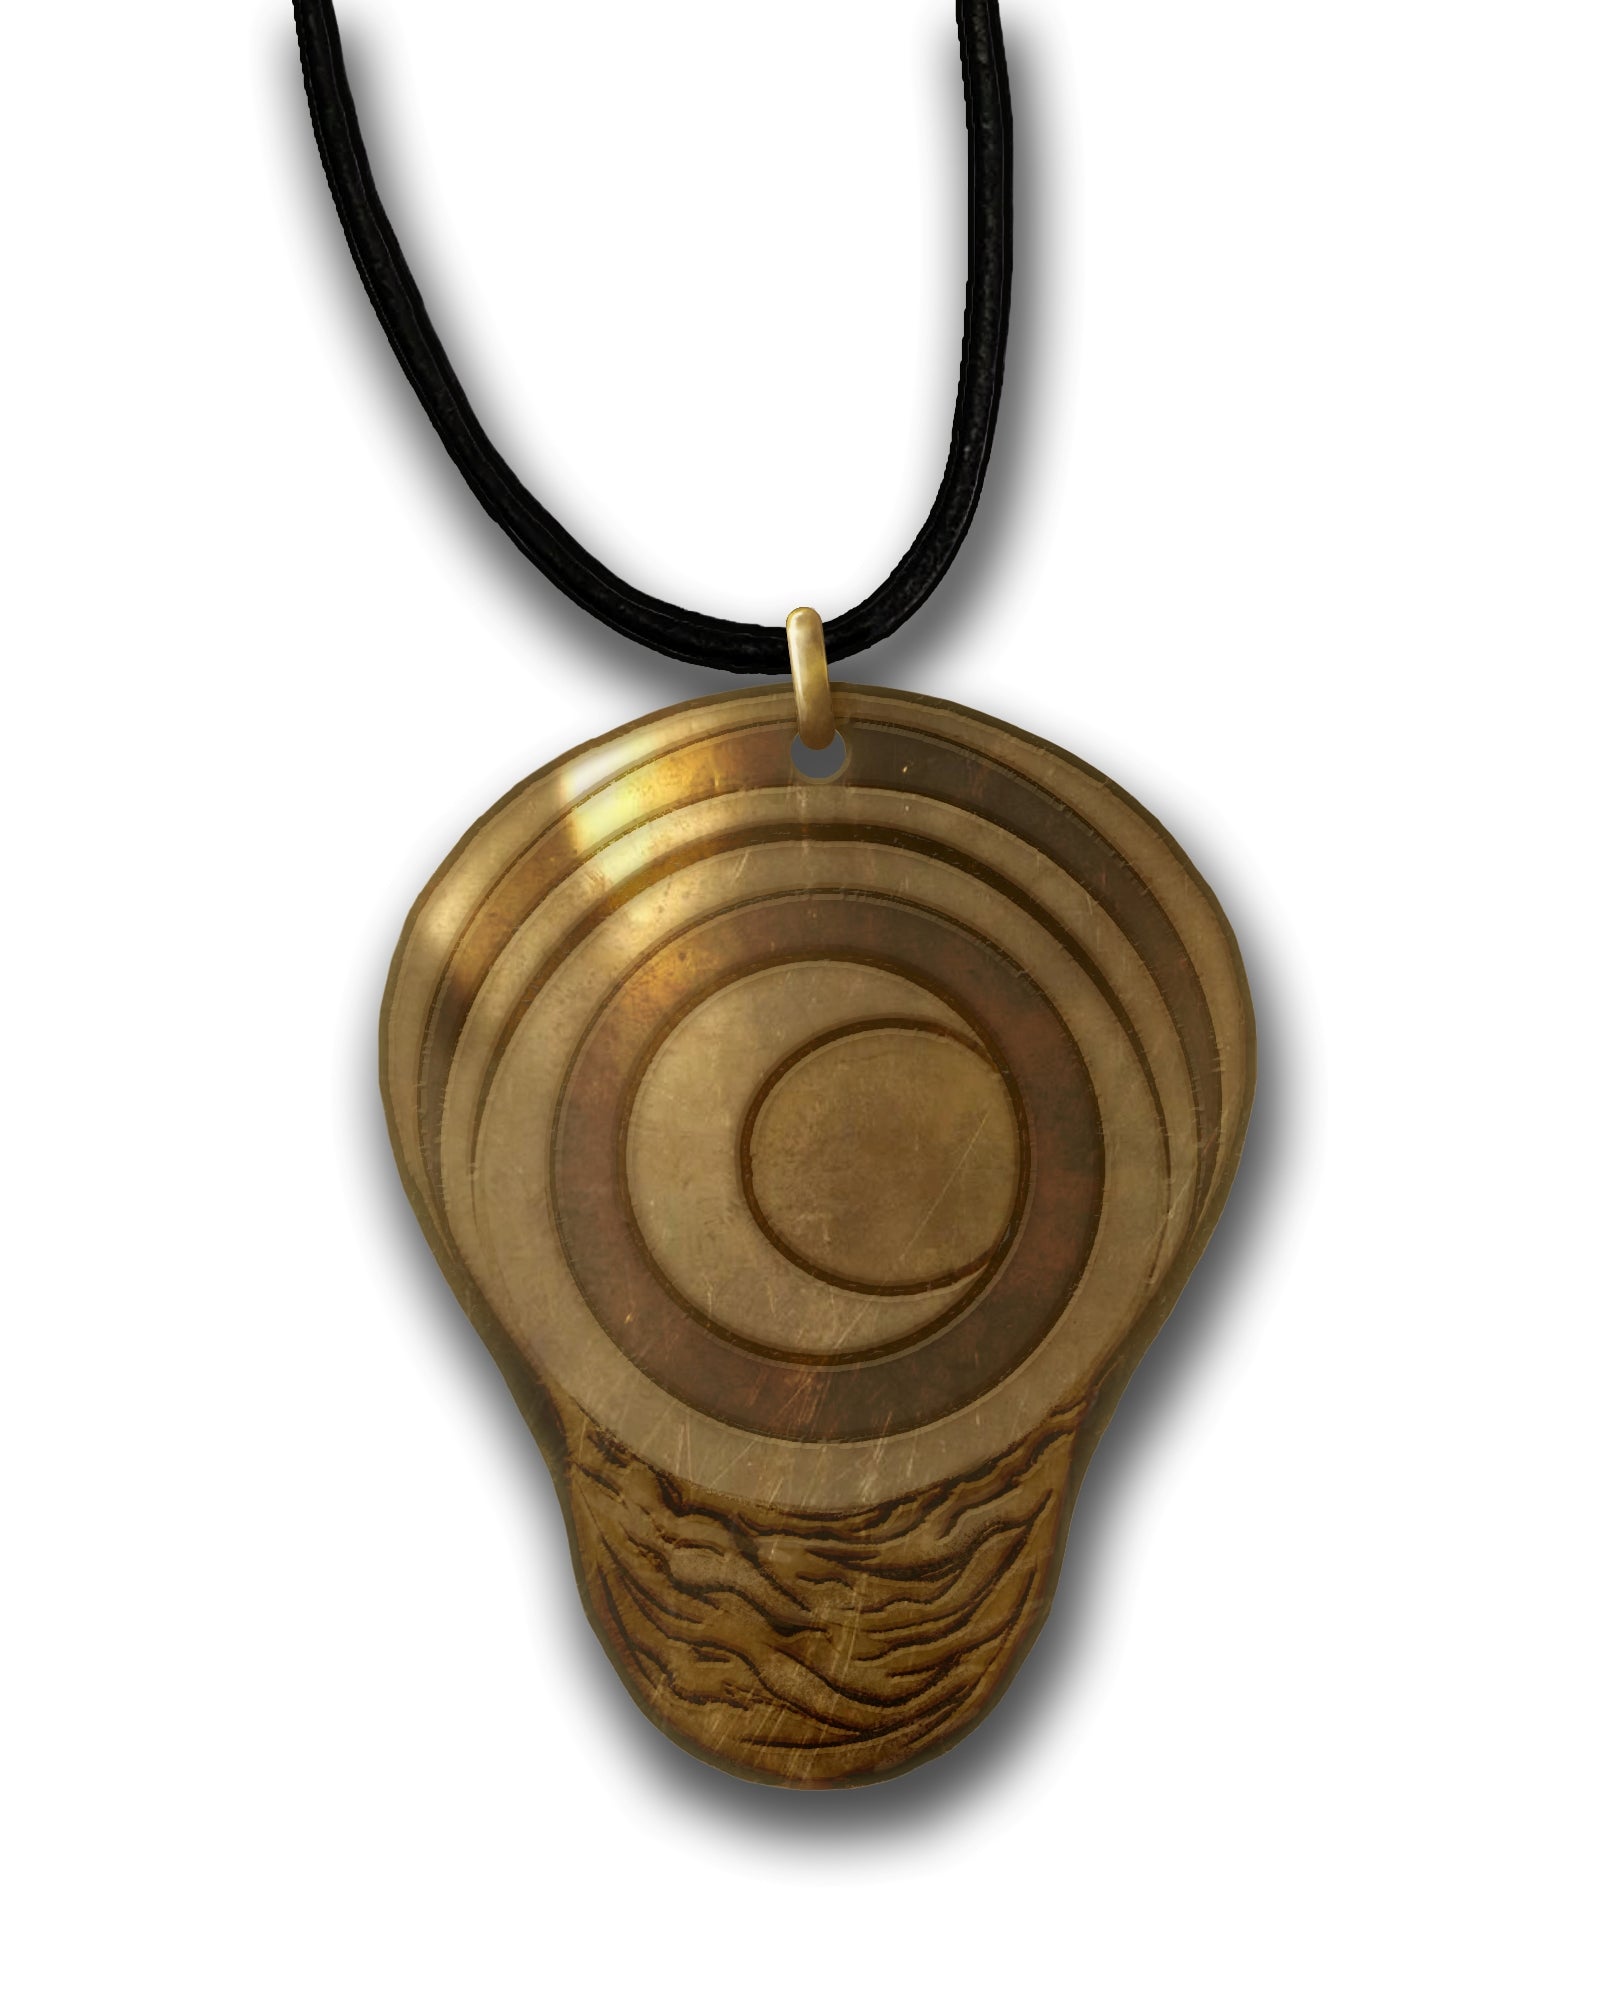 A brass charm, shaped like an upside-down pear, with a swirling crescent moon design and brown cord necklace.